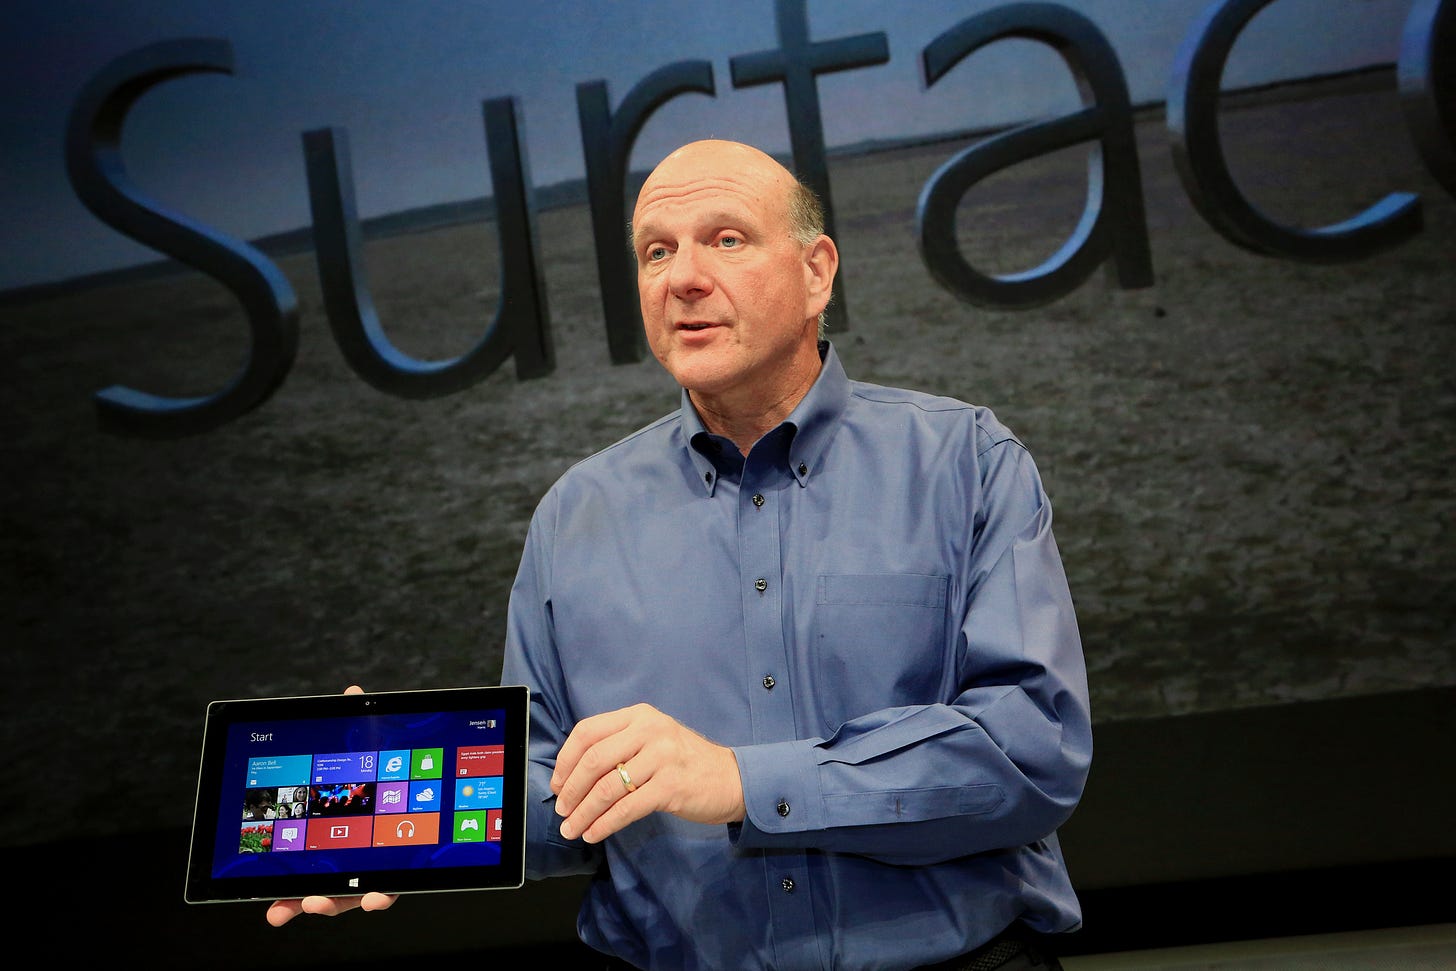 Ballmer is holding a surface on stage. The backdrop is projecting Surface over a field of green grass.